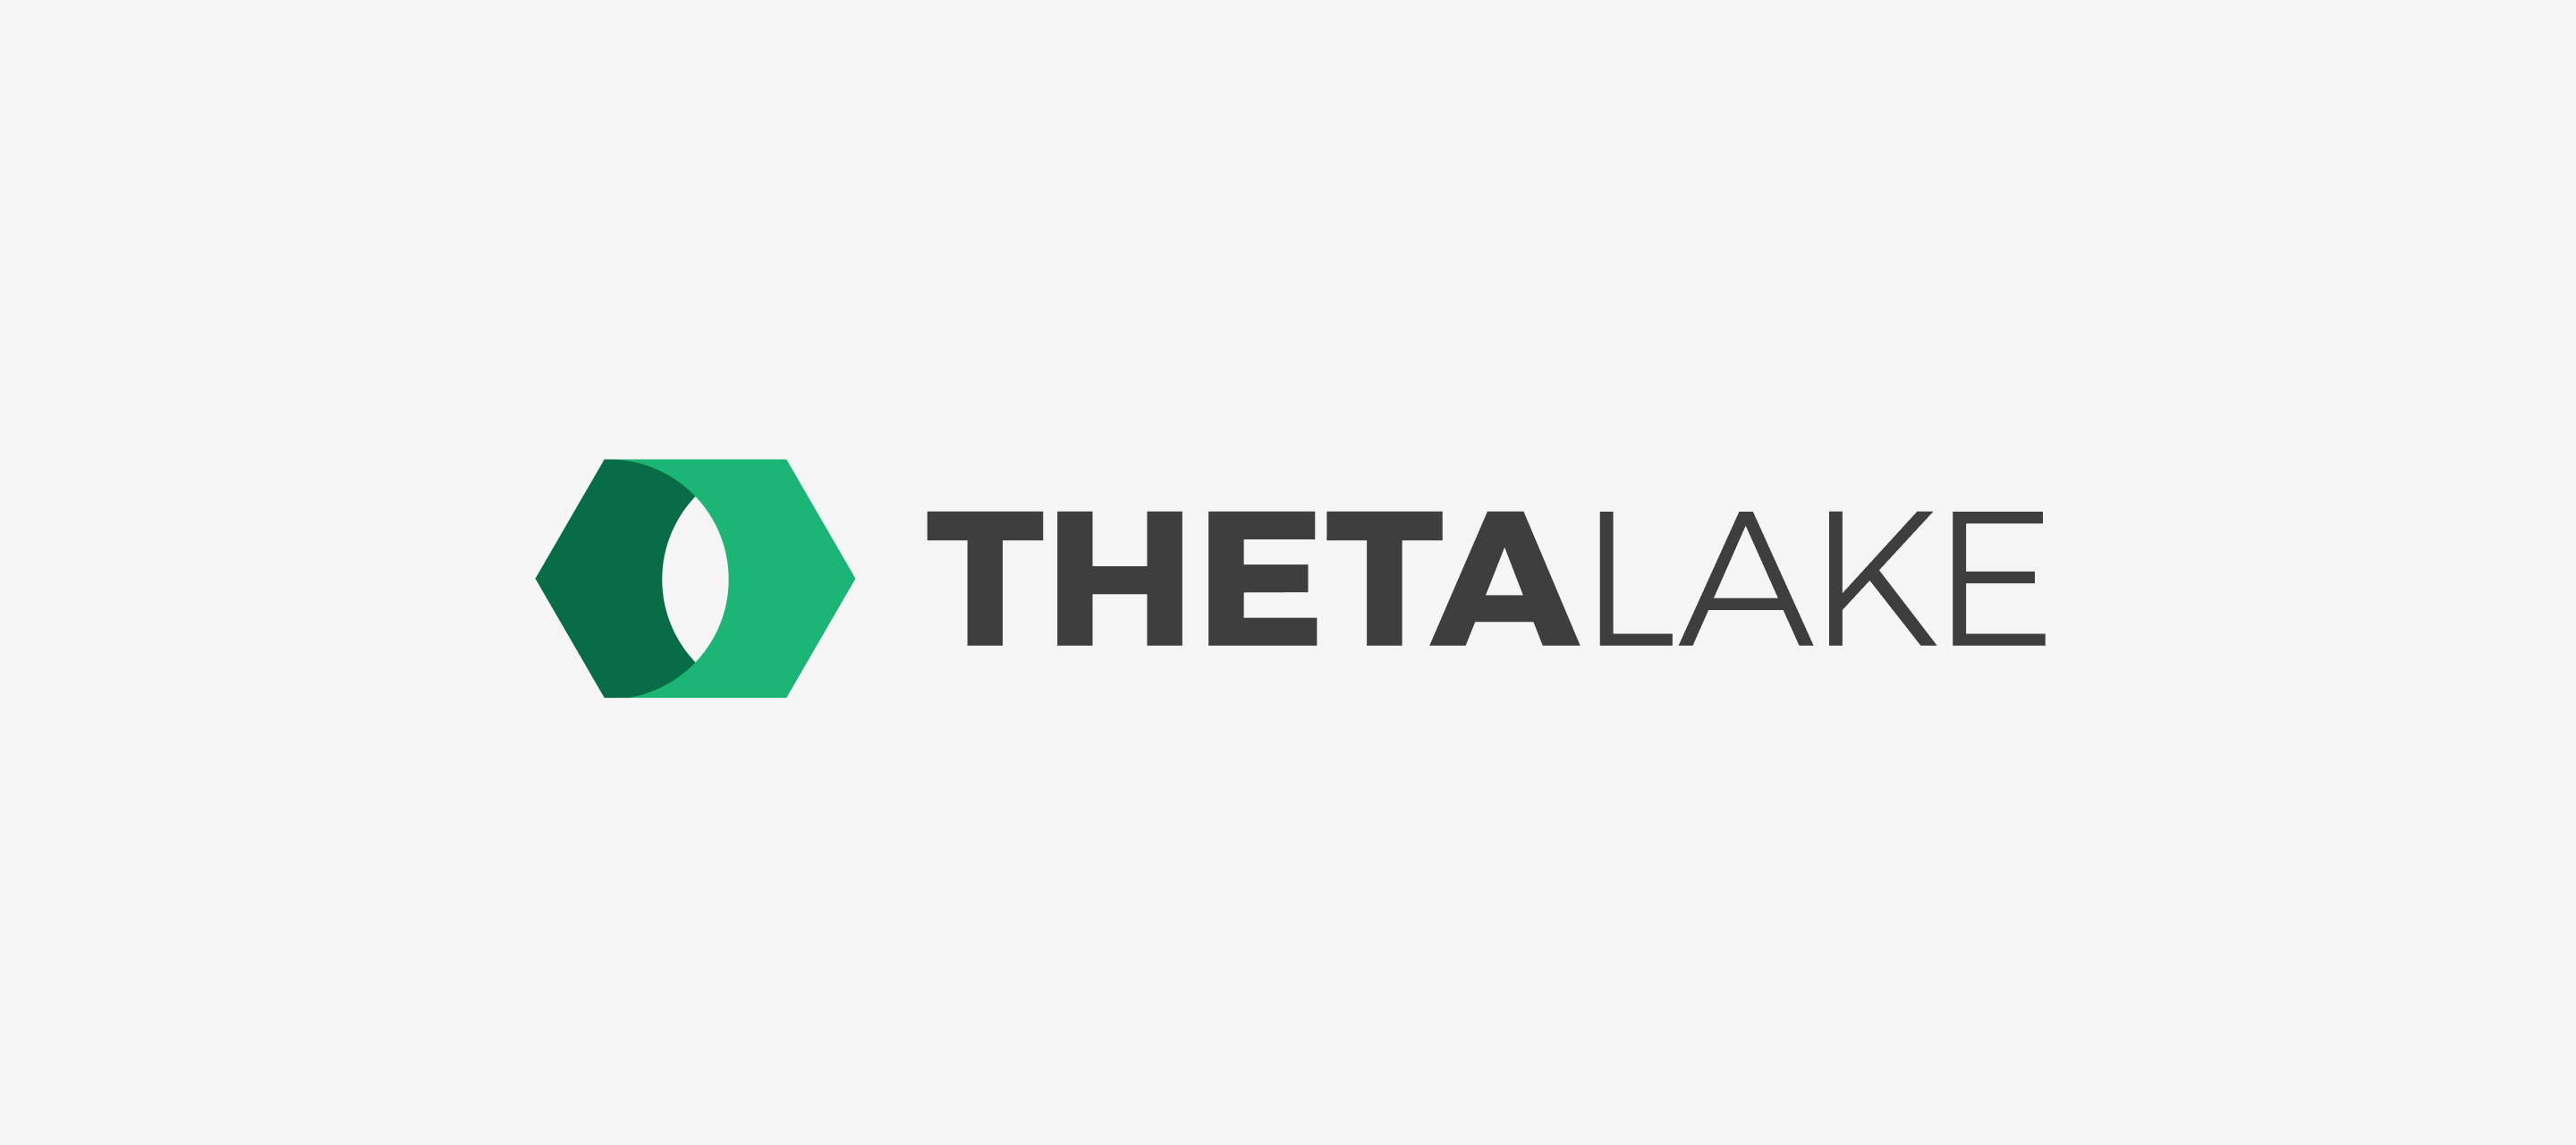 Introducing Enhanced Security & Compliance for Slido (and Webex Polling) with Theta Lake 🔒